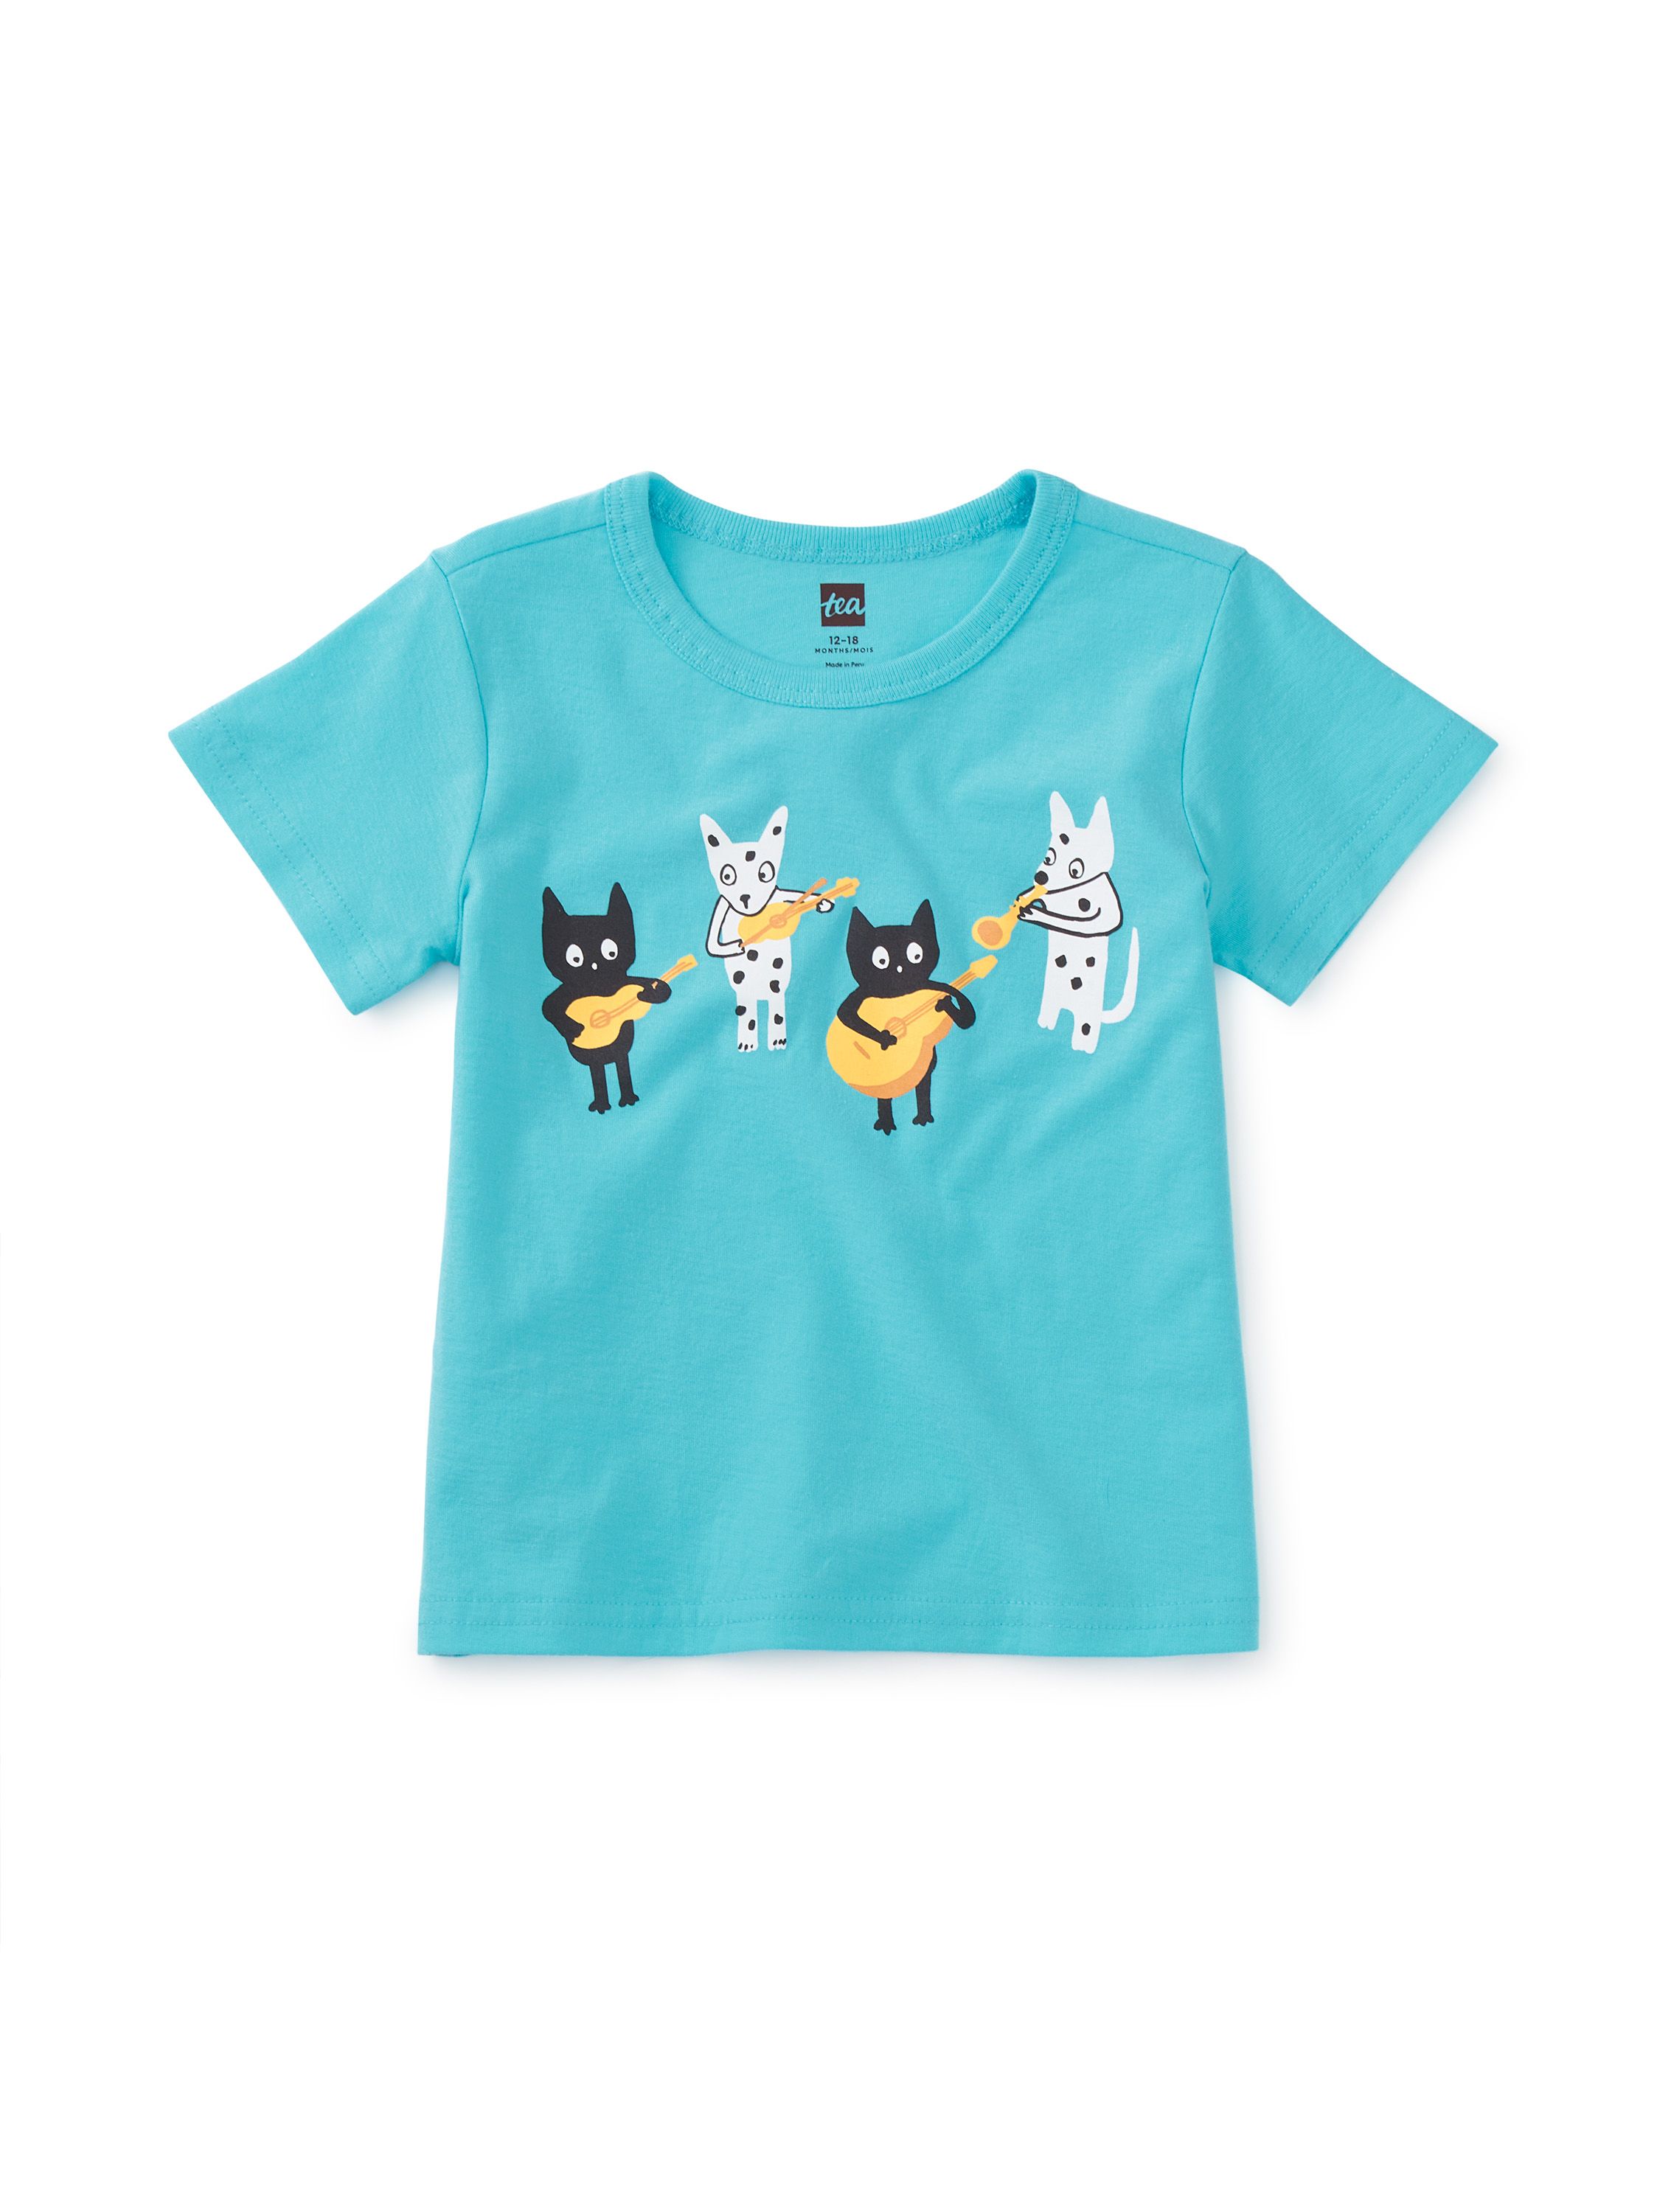 Mariachi Pets Baby Graphic Tee | Tea Collection